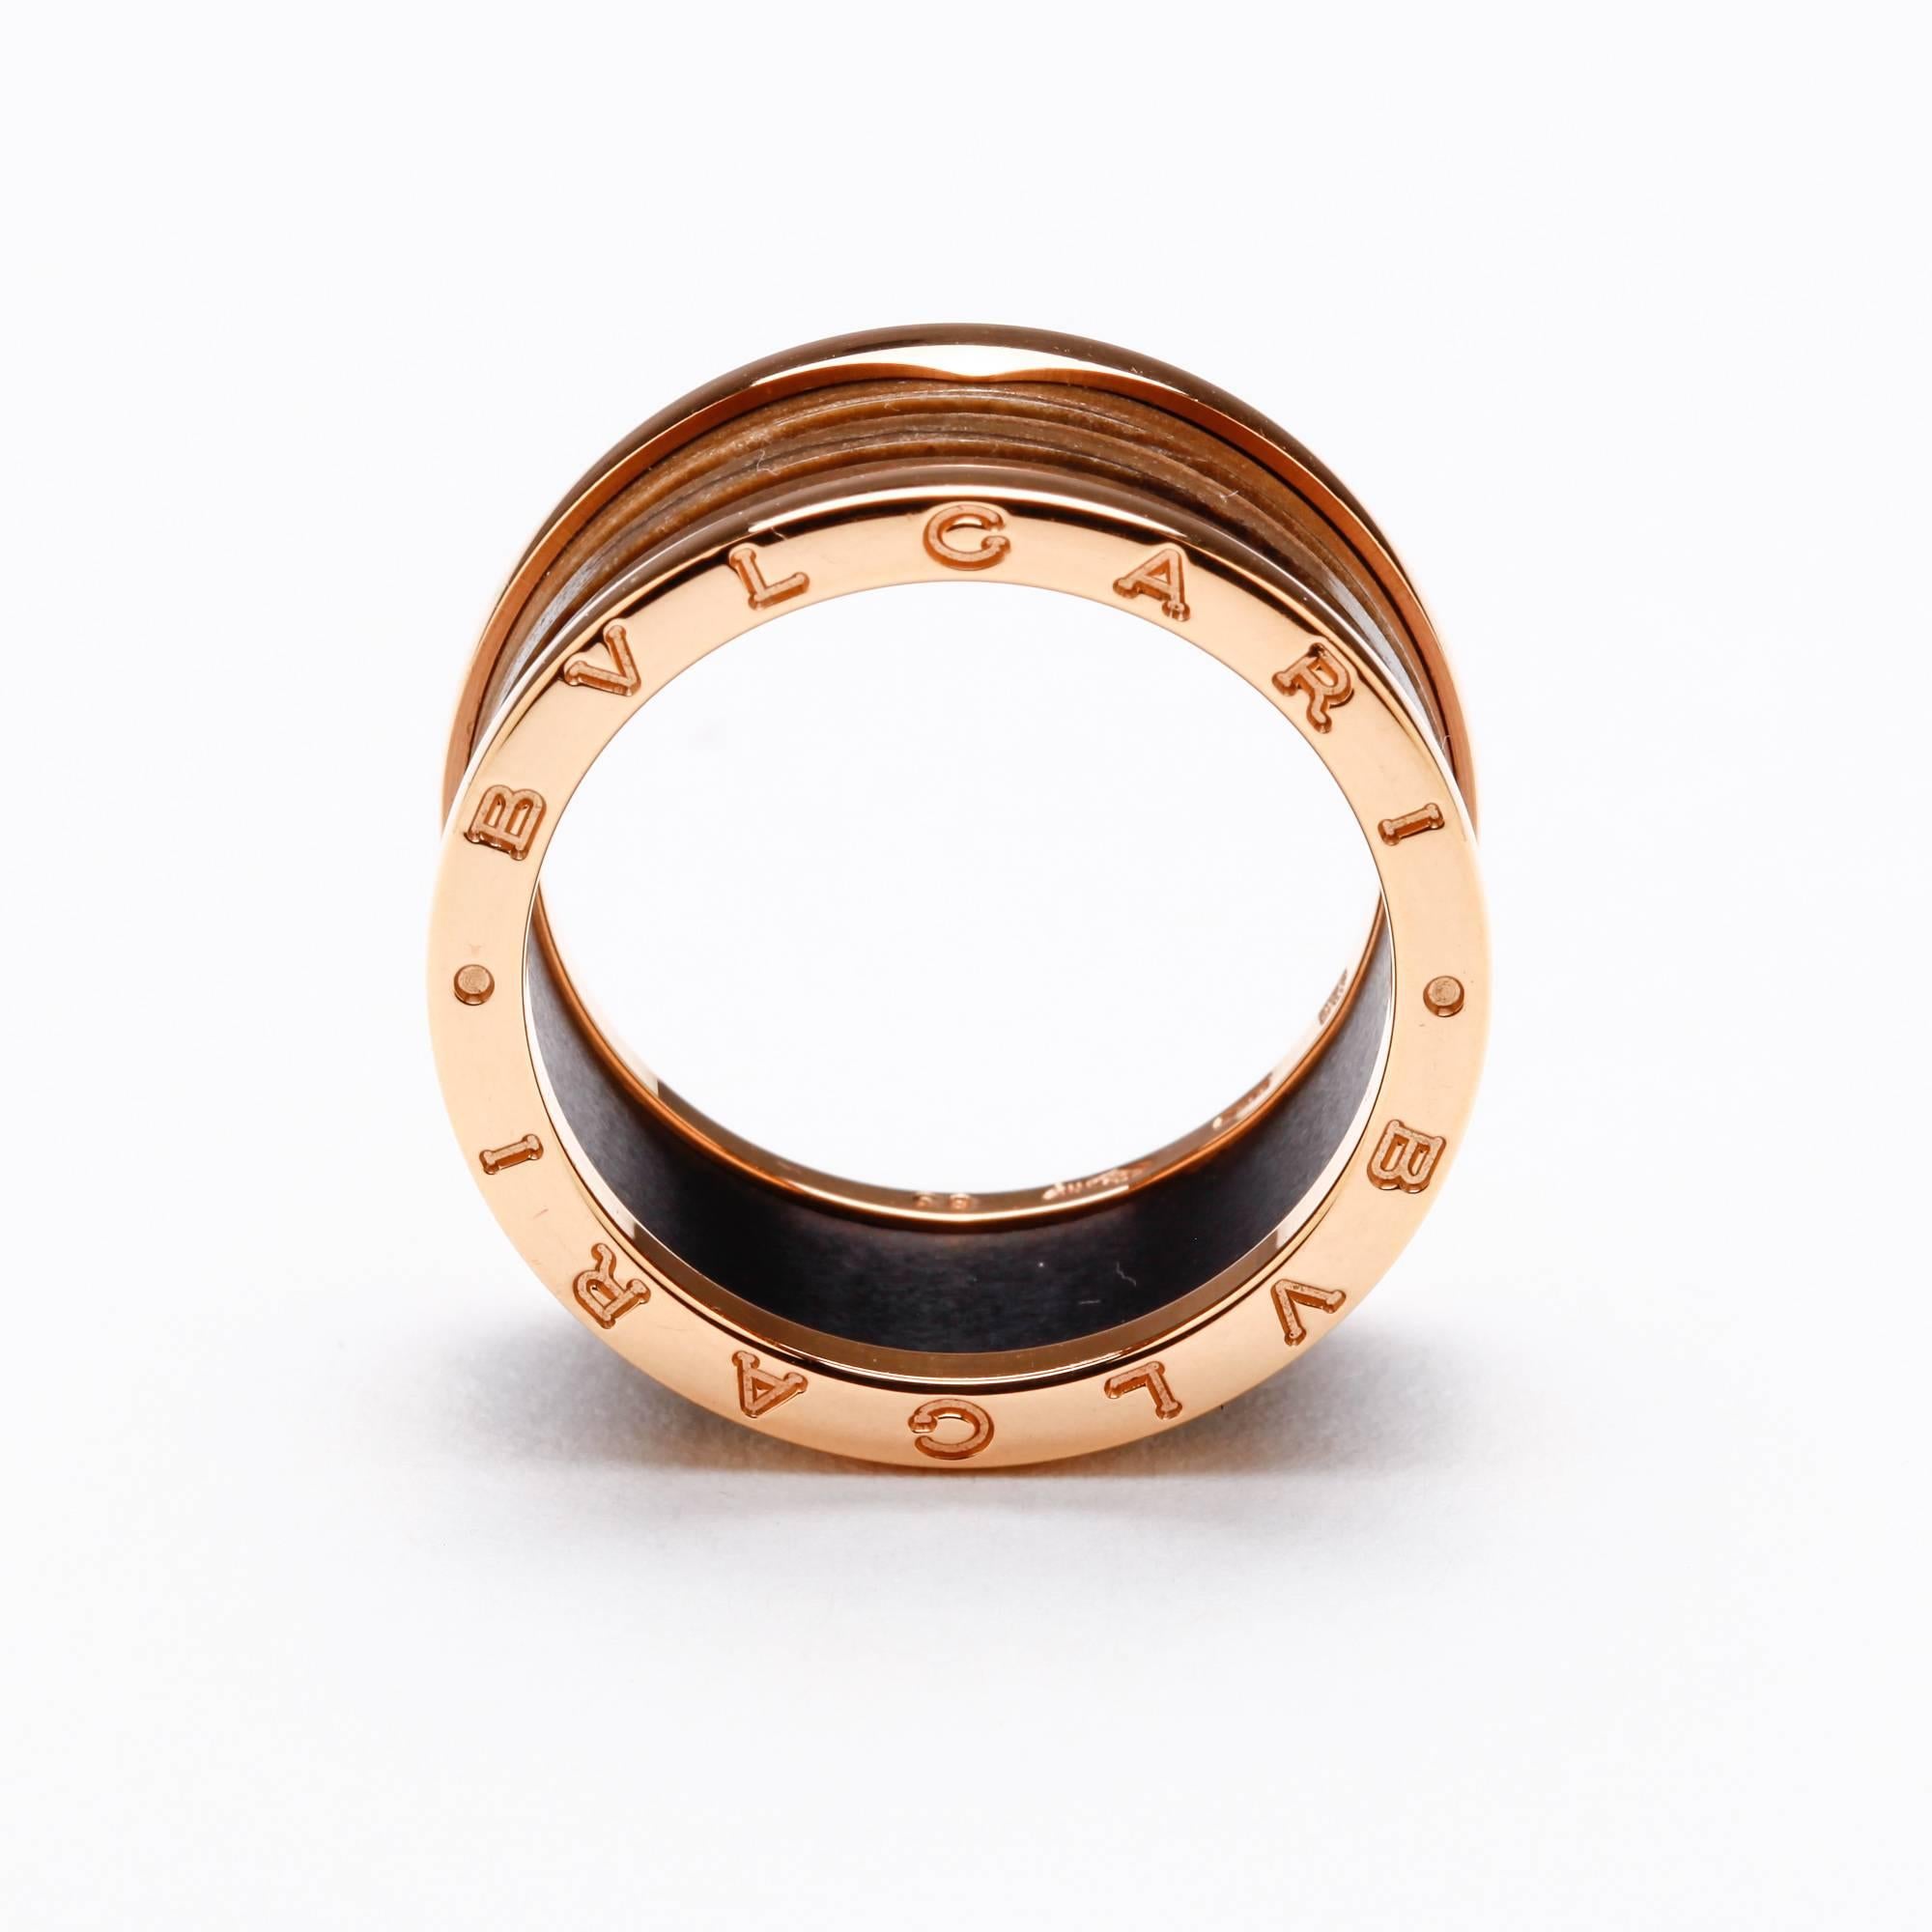 Inspired by the Colosseum in Rome, this 18k rose gold and olive green marble Bulgari B.zero1 ring represents both the eternal city and modern Italian design. The ring is in new condition and would make a perfect gift. Please note that it is a